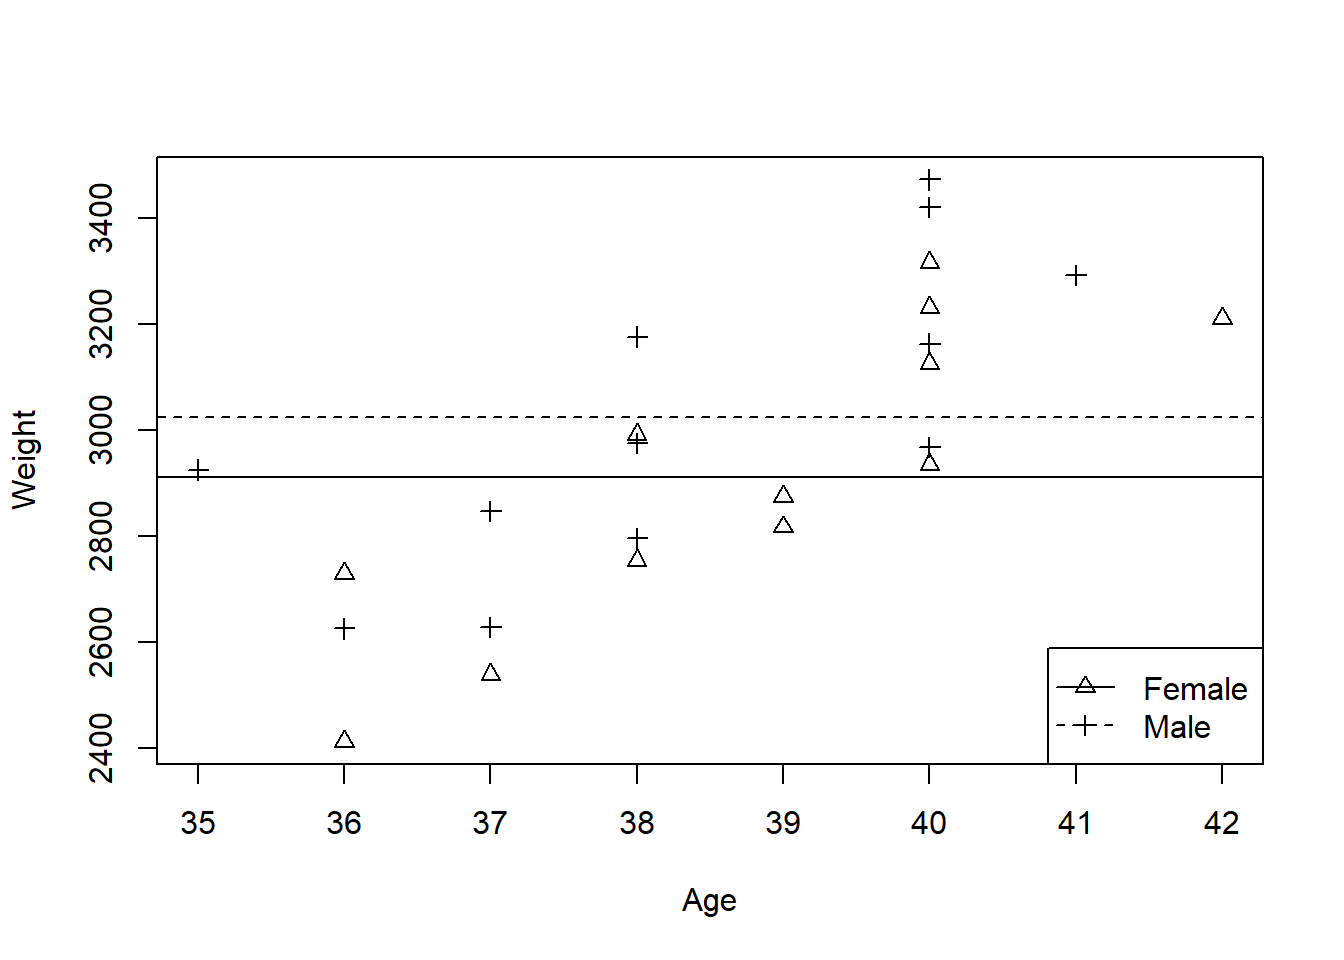 Predicted baby weights using a mean for each sex